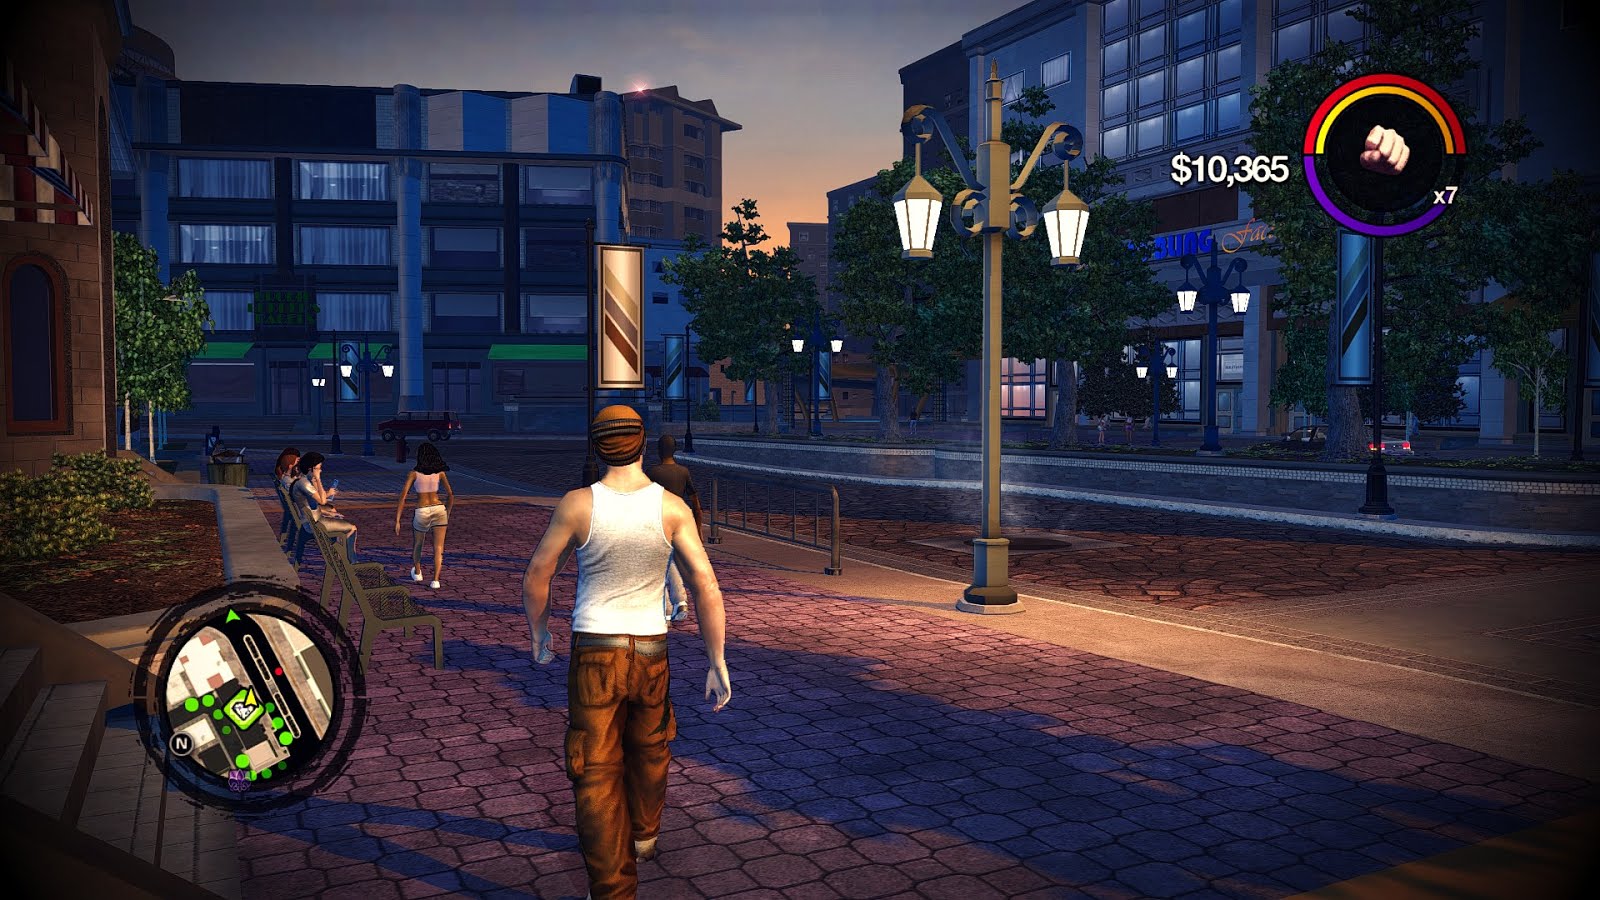 Saints row 2 map differences - rilodream